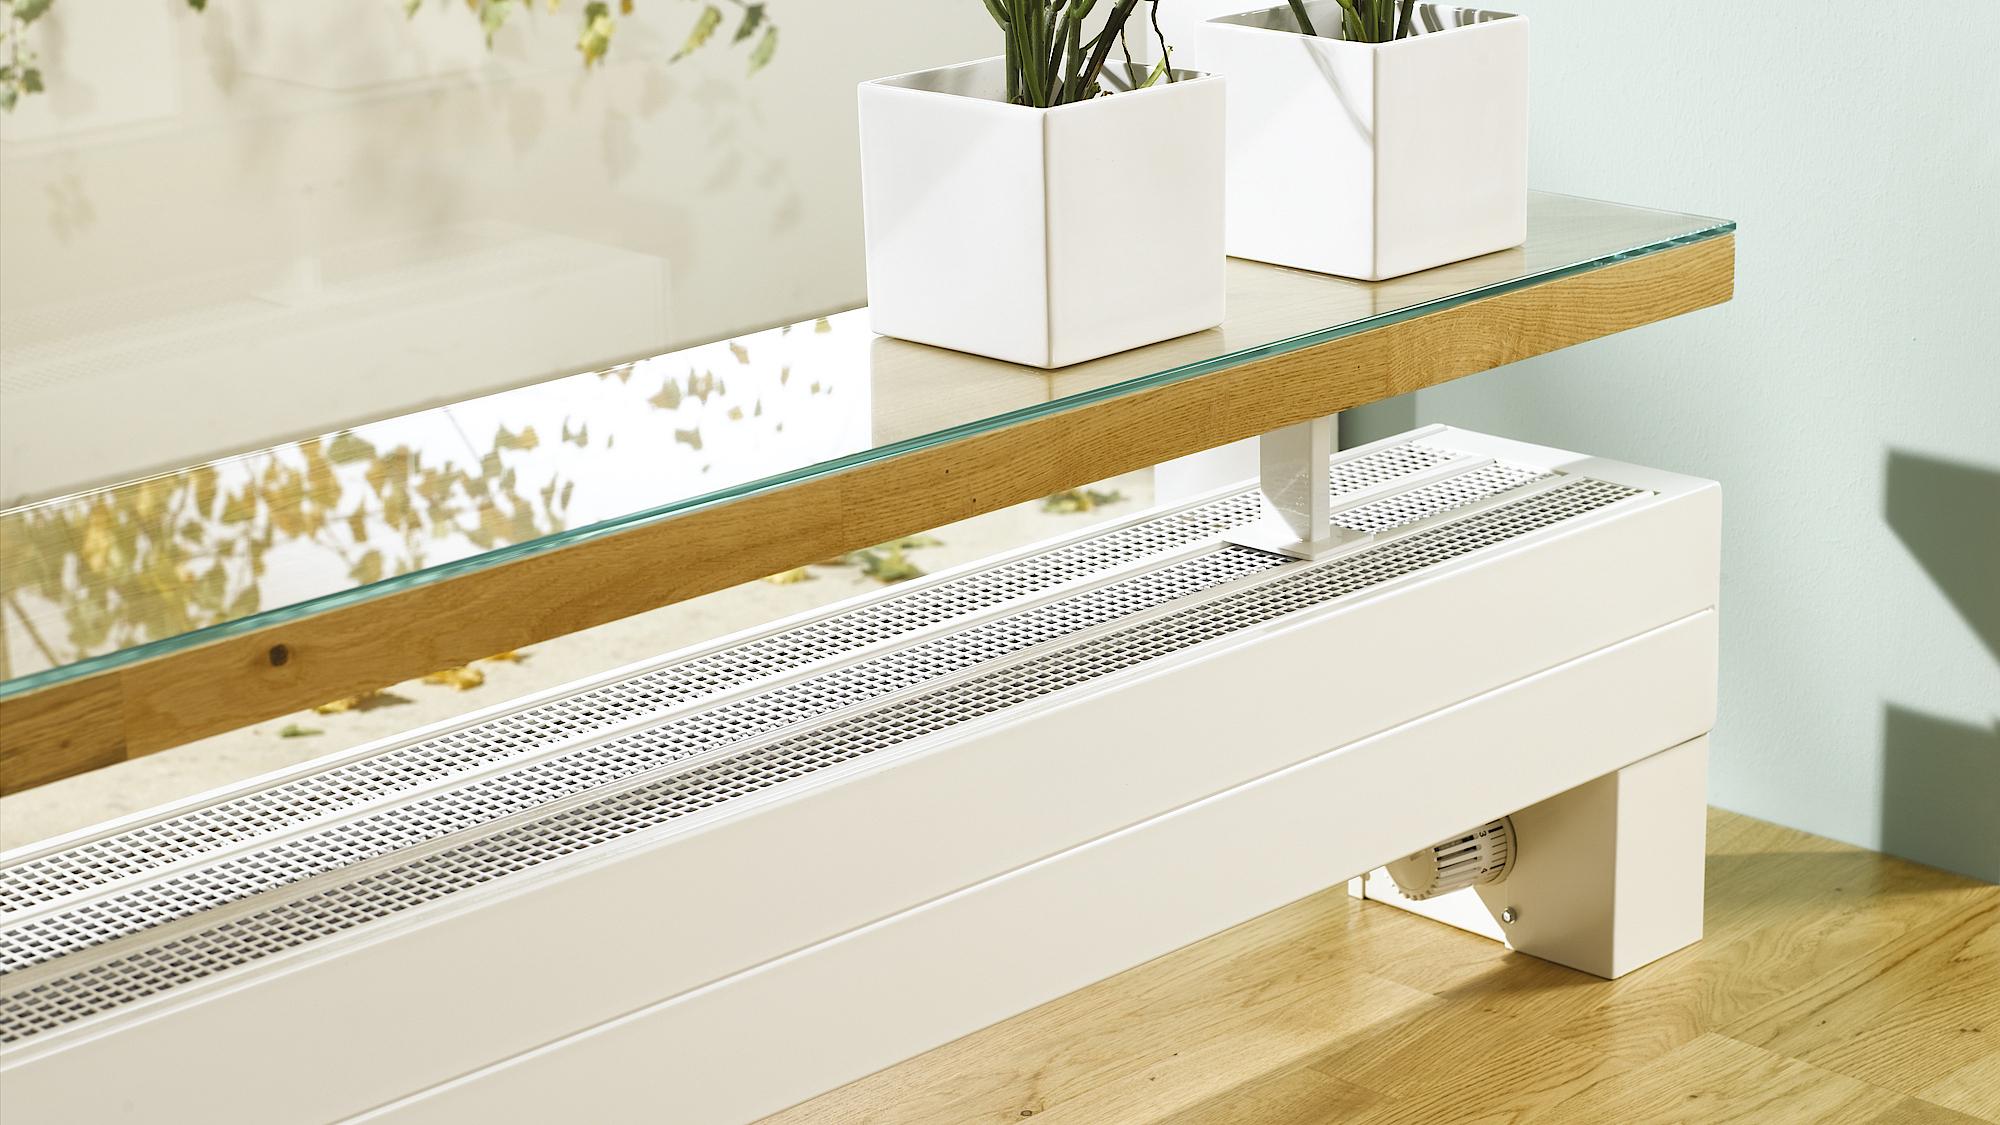 Kermi KNN convector. Elegant thermal comfort in a highly compact package.